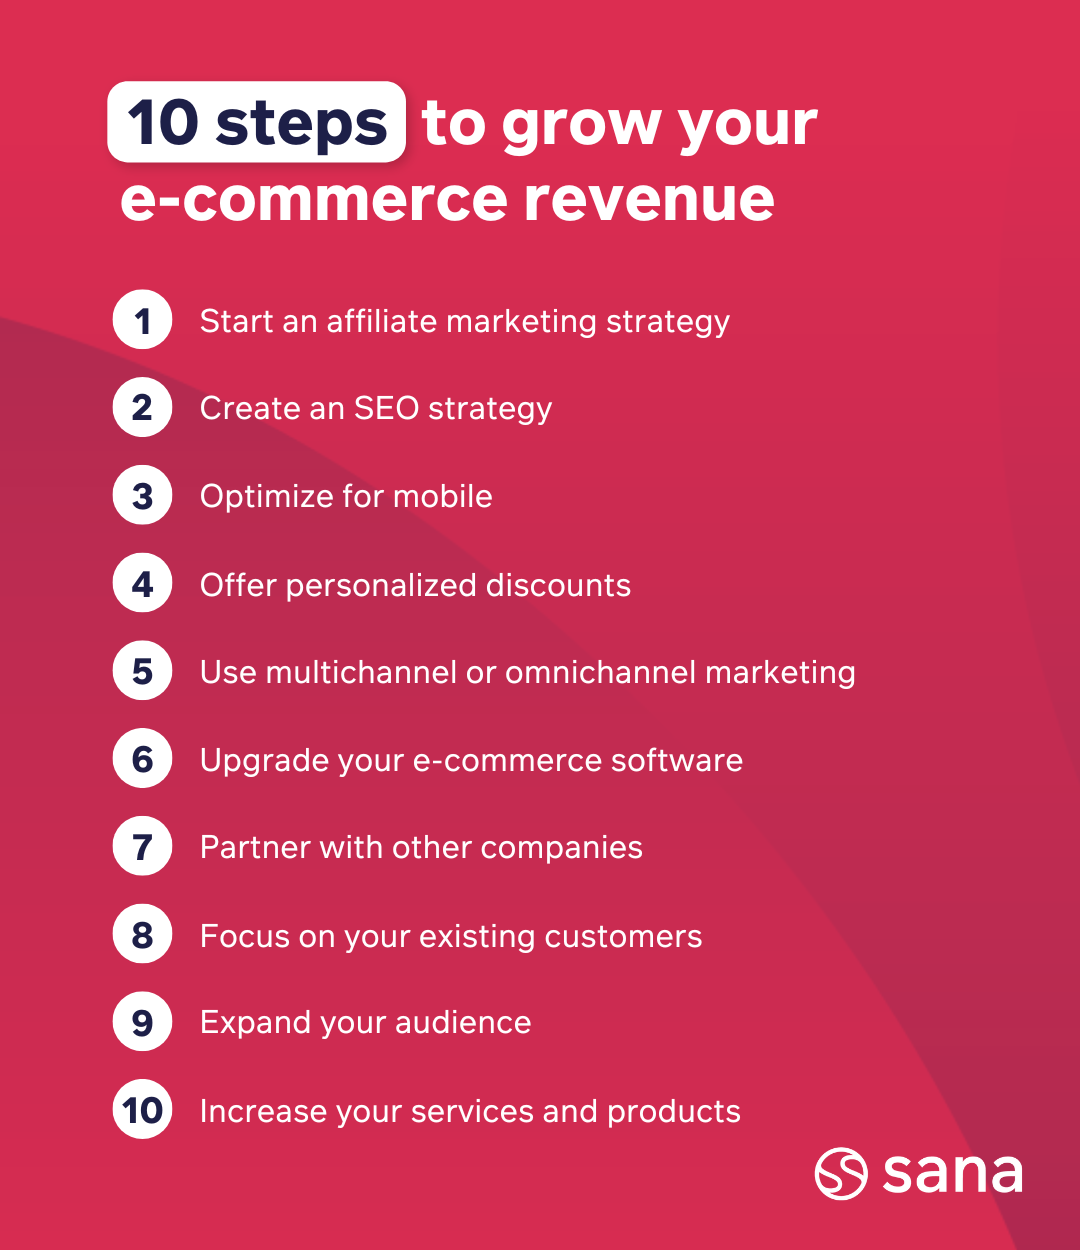 How to increase your e-commerce revenue - 10 steps - Grow your online revenue and e-commerce sales